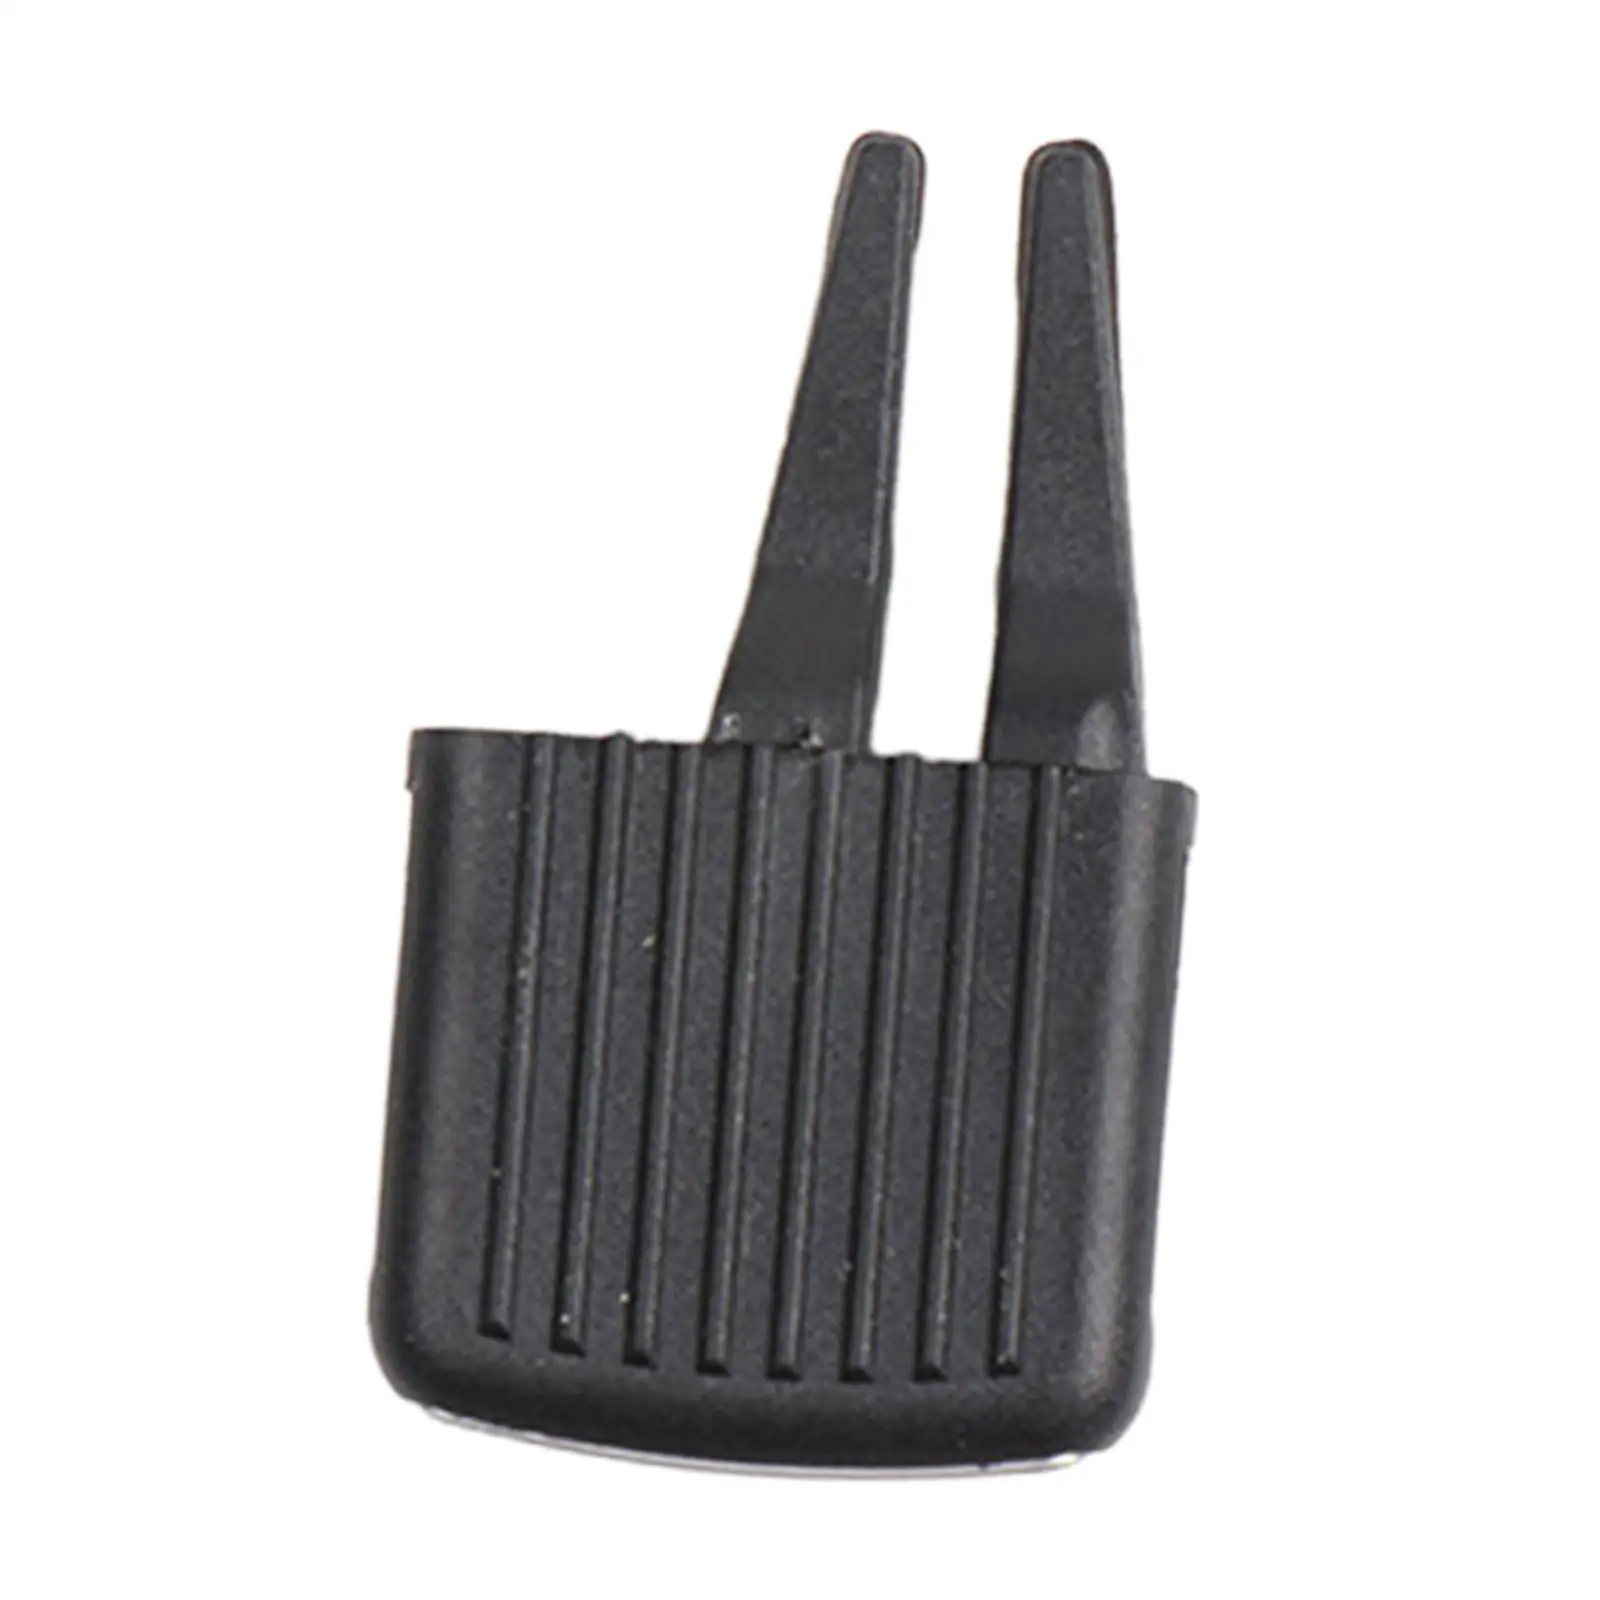 Air Vent Clip Durable Accessory Automotive for Touran Convenient Installation ,Lightweight ,Replacement Easily Clip on